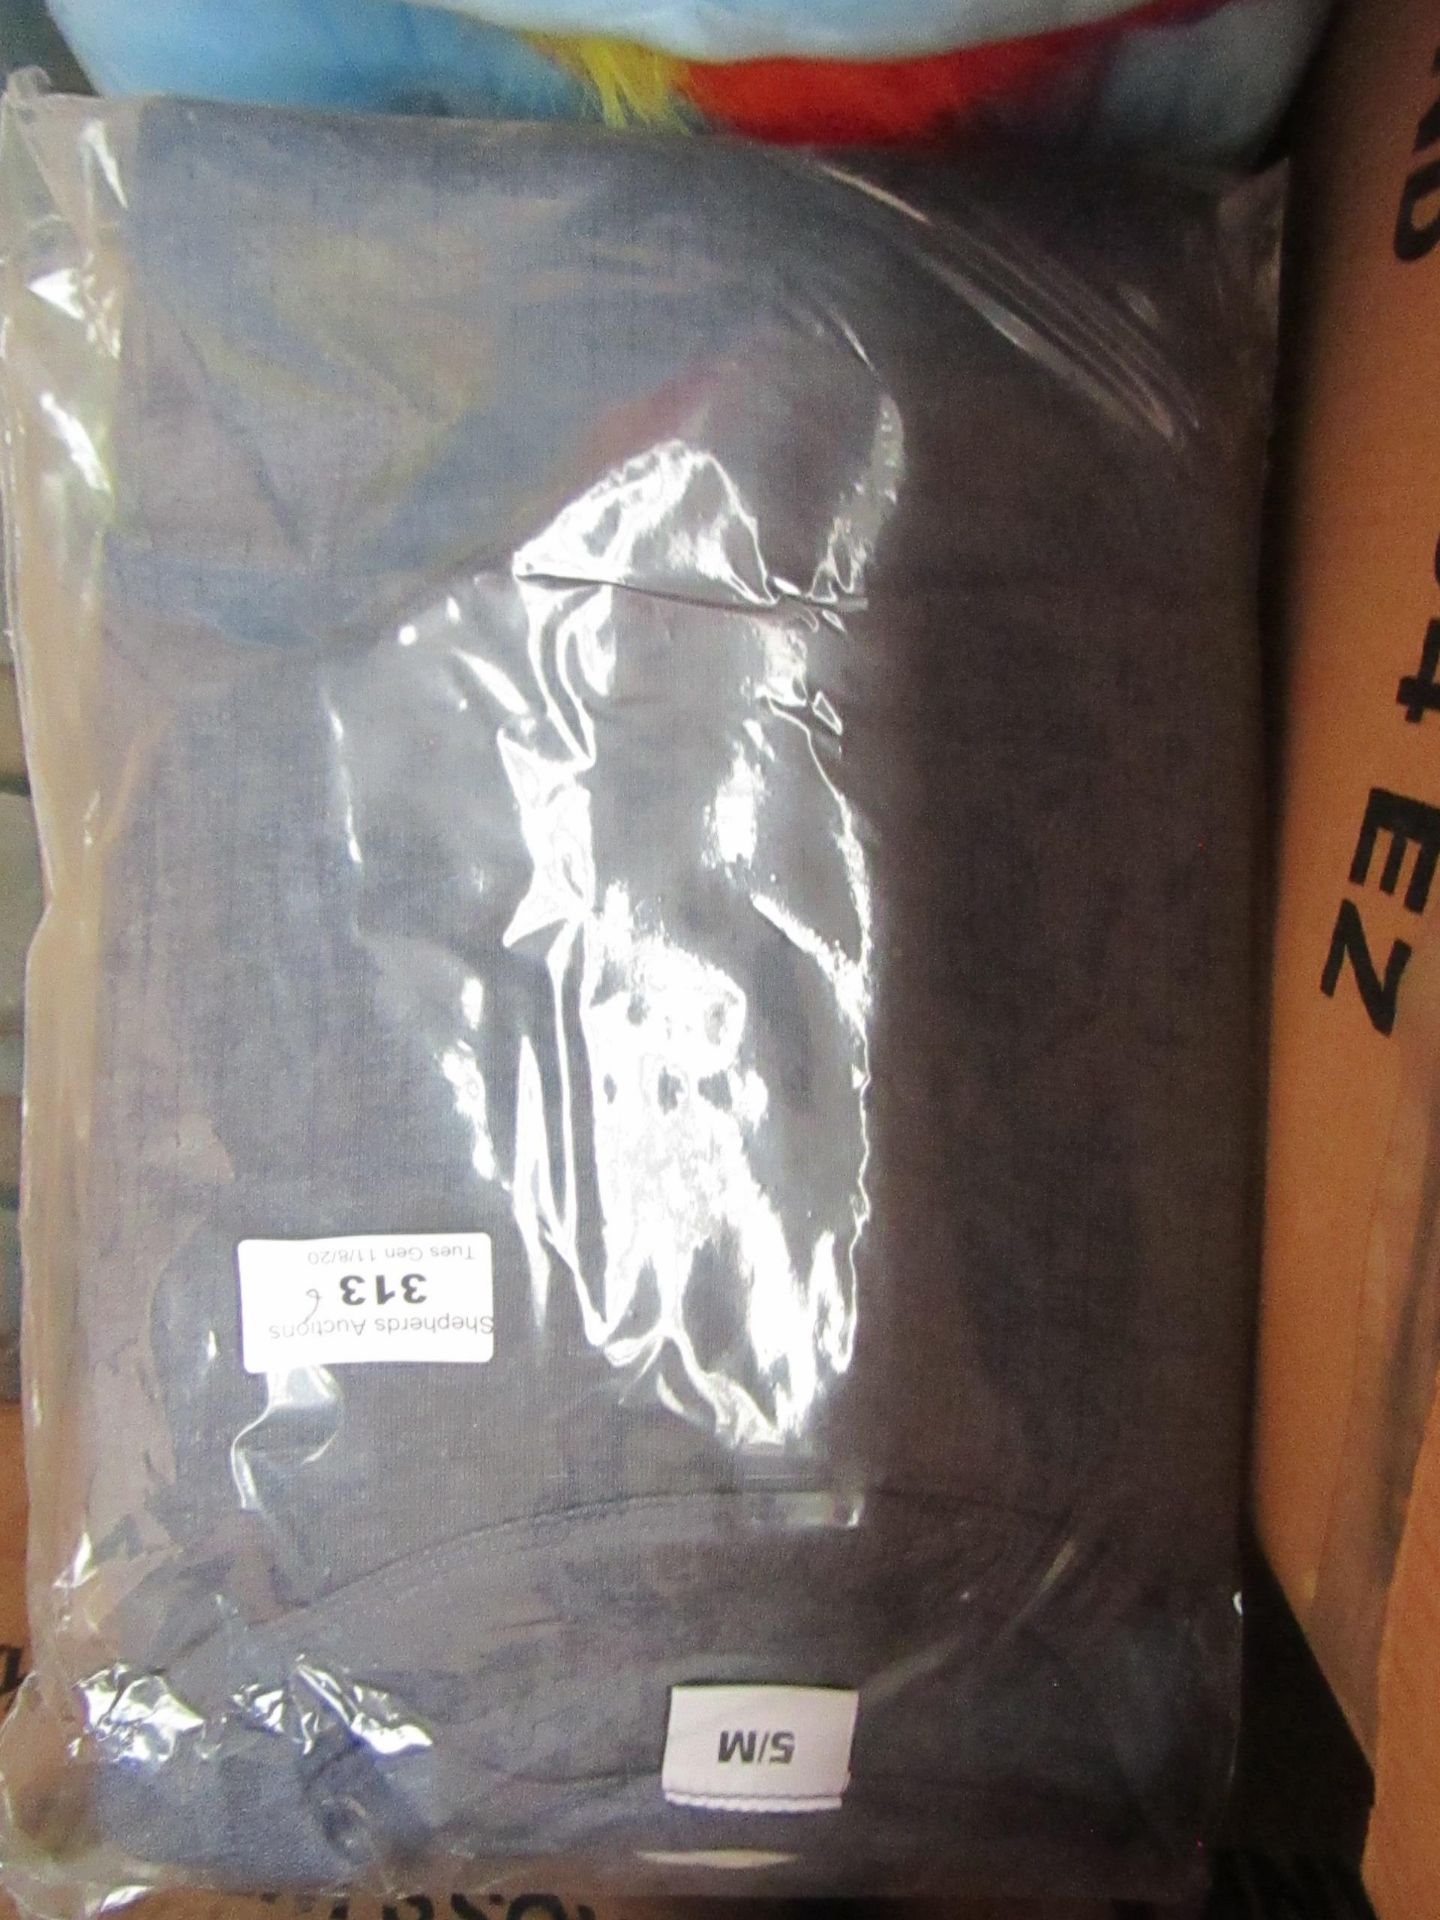 6x 5/M Long Sleeve Thermal Tops. New & packaged.